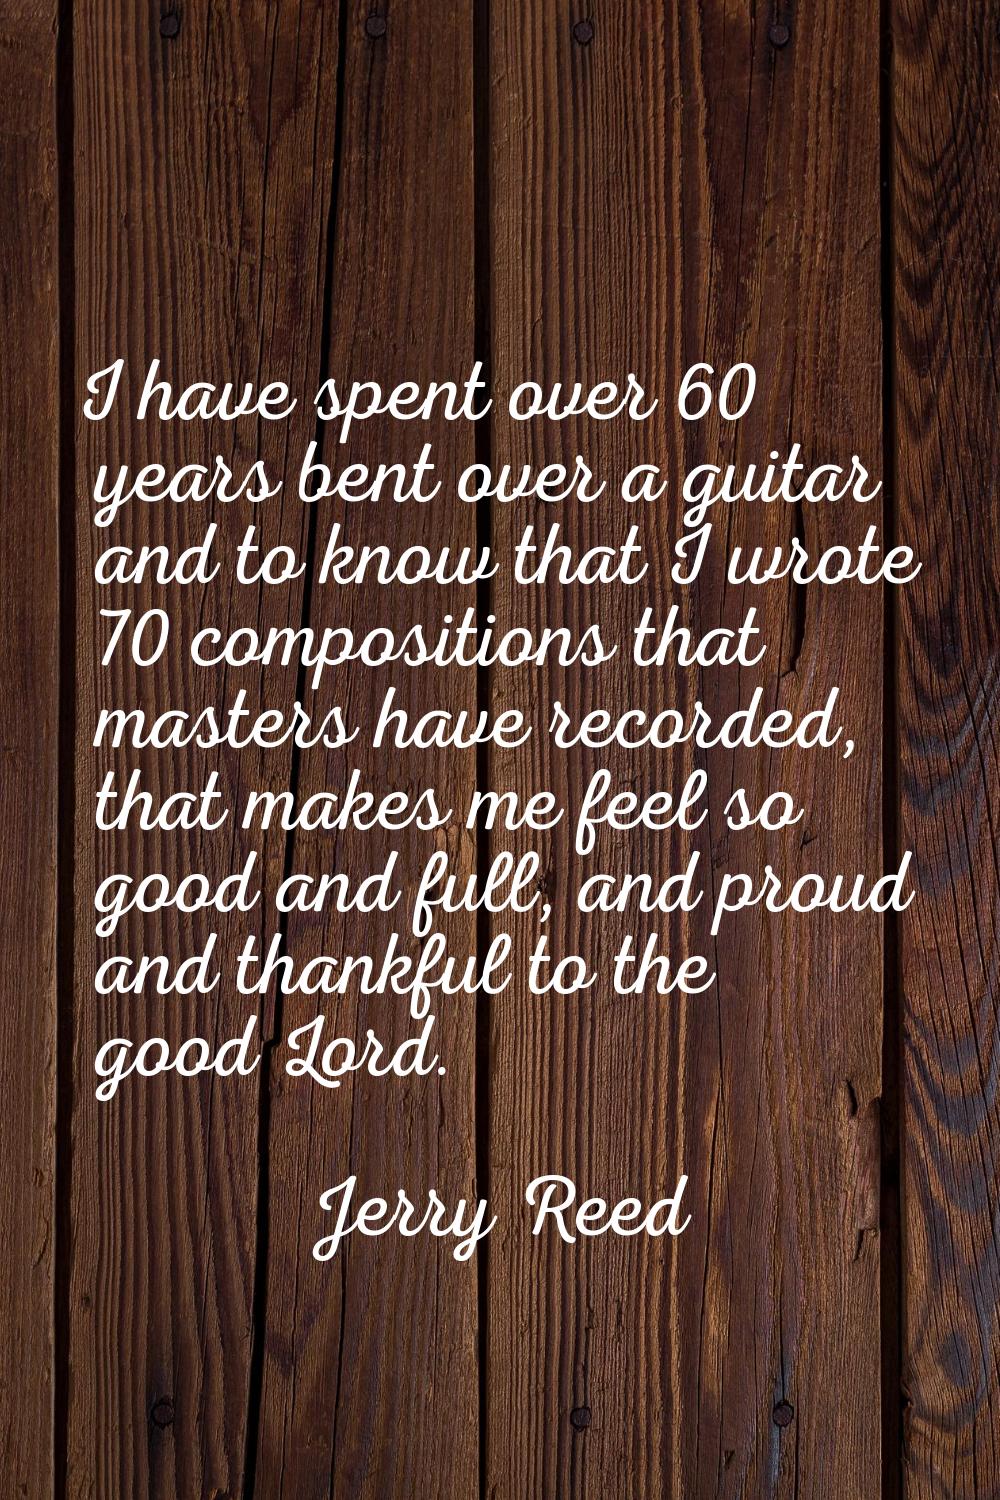 I have spent over 60 years bent over a guitar and to know that I wrote 70 compositions that masters